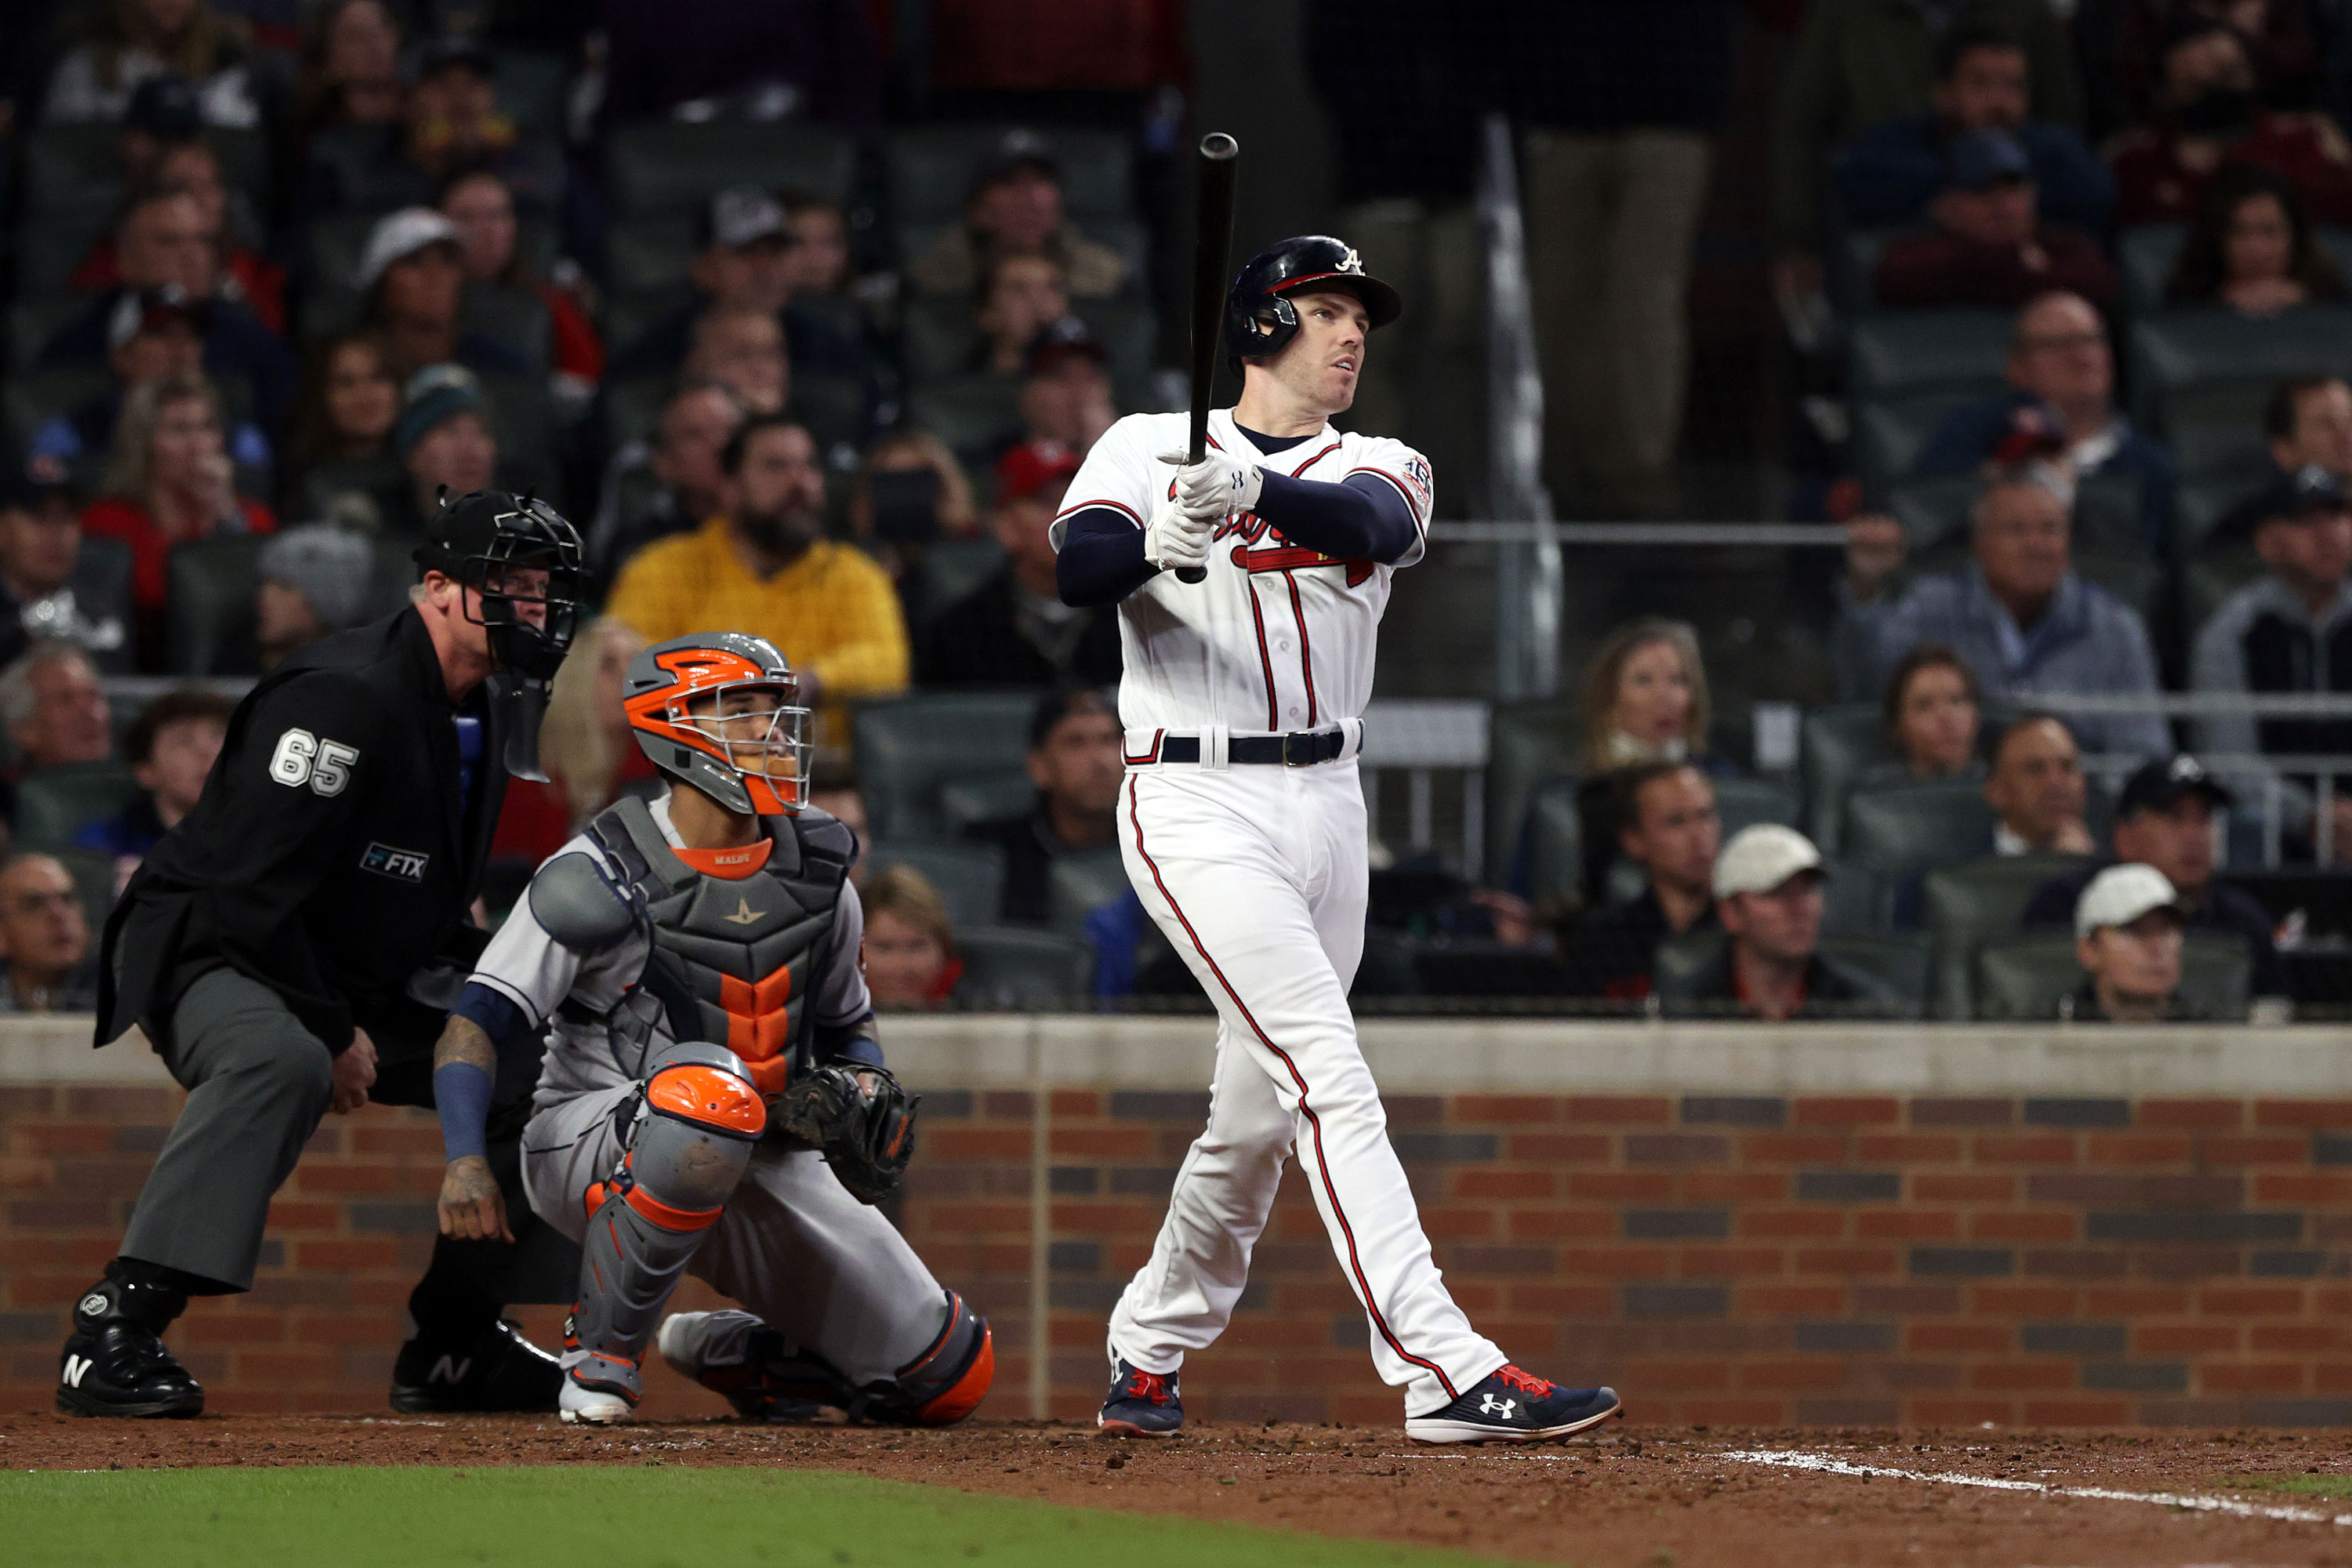 Freddie Freeman of the Braves hits a solo home run during the third inning.